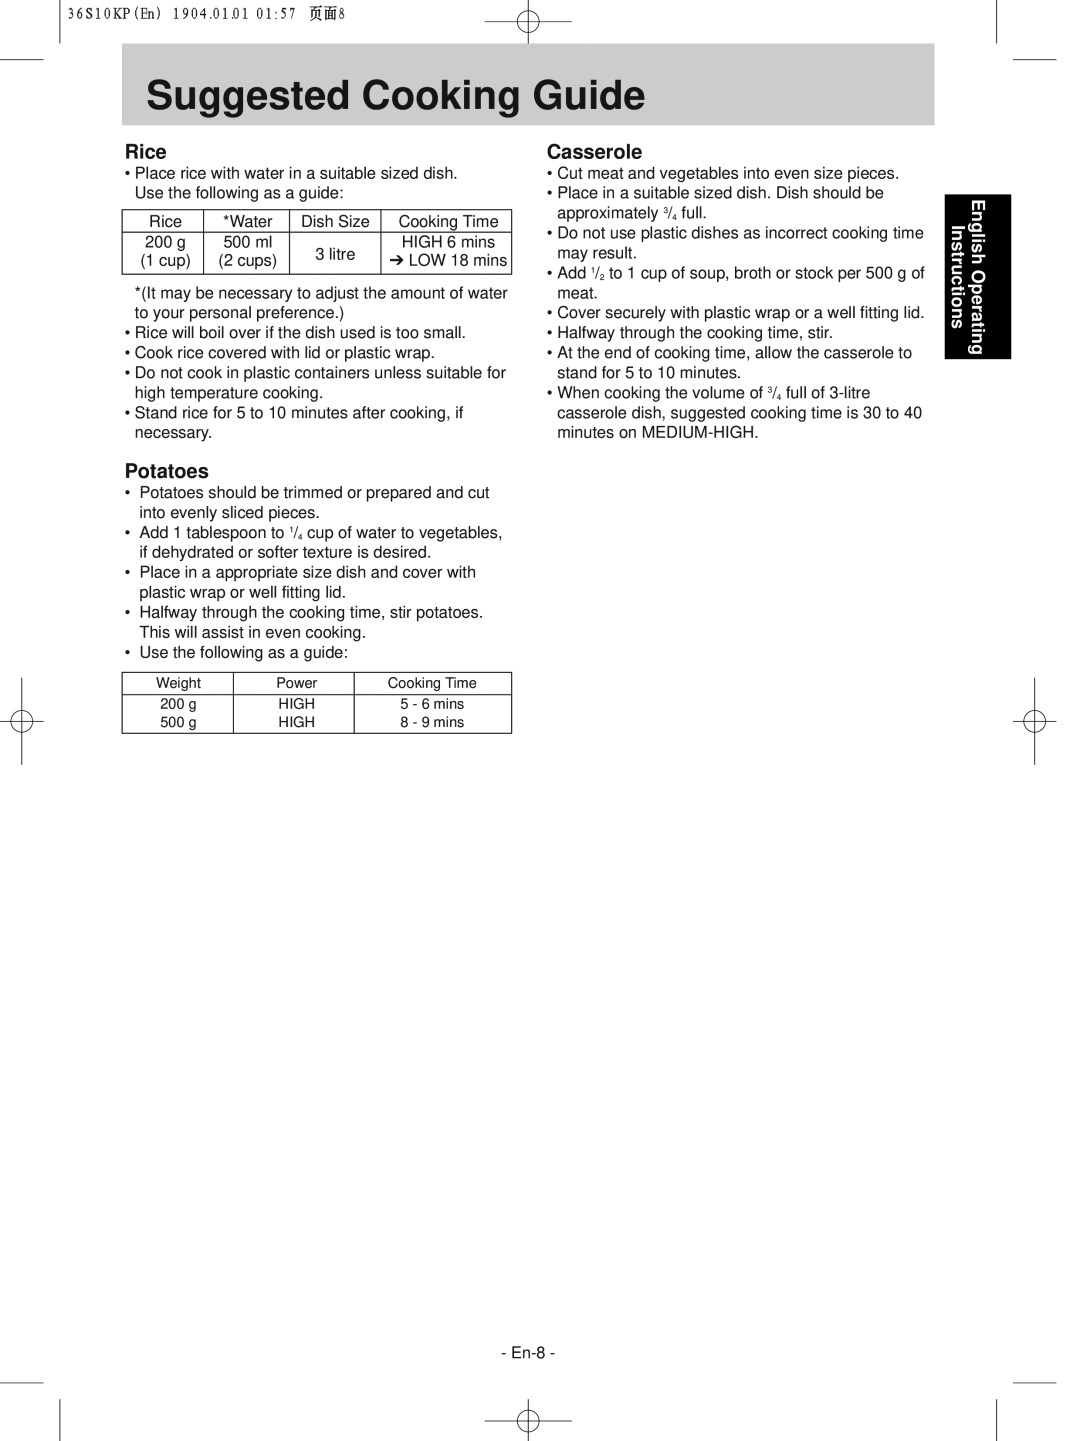 Panasonic NN-S215WF, NN-S235WF manual Suggested Cooking Guide, Rice, Potatoes, Casserole, English Operating Instructions 